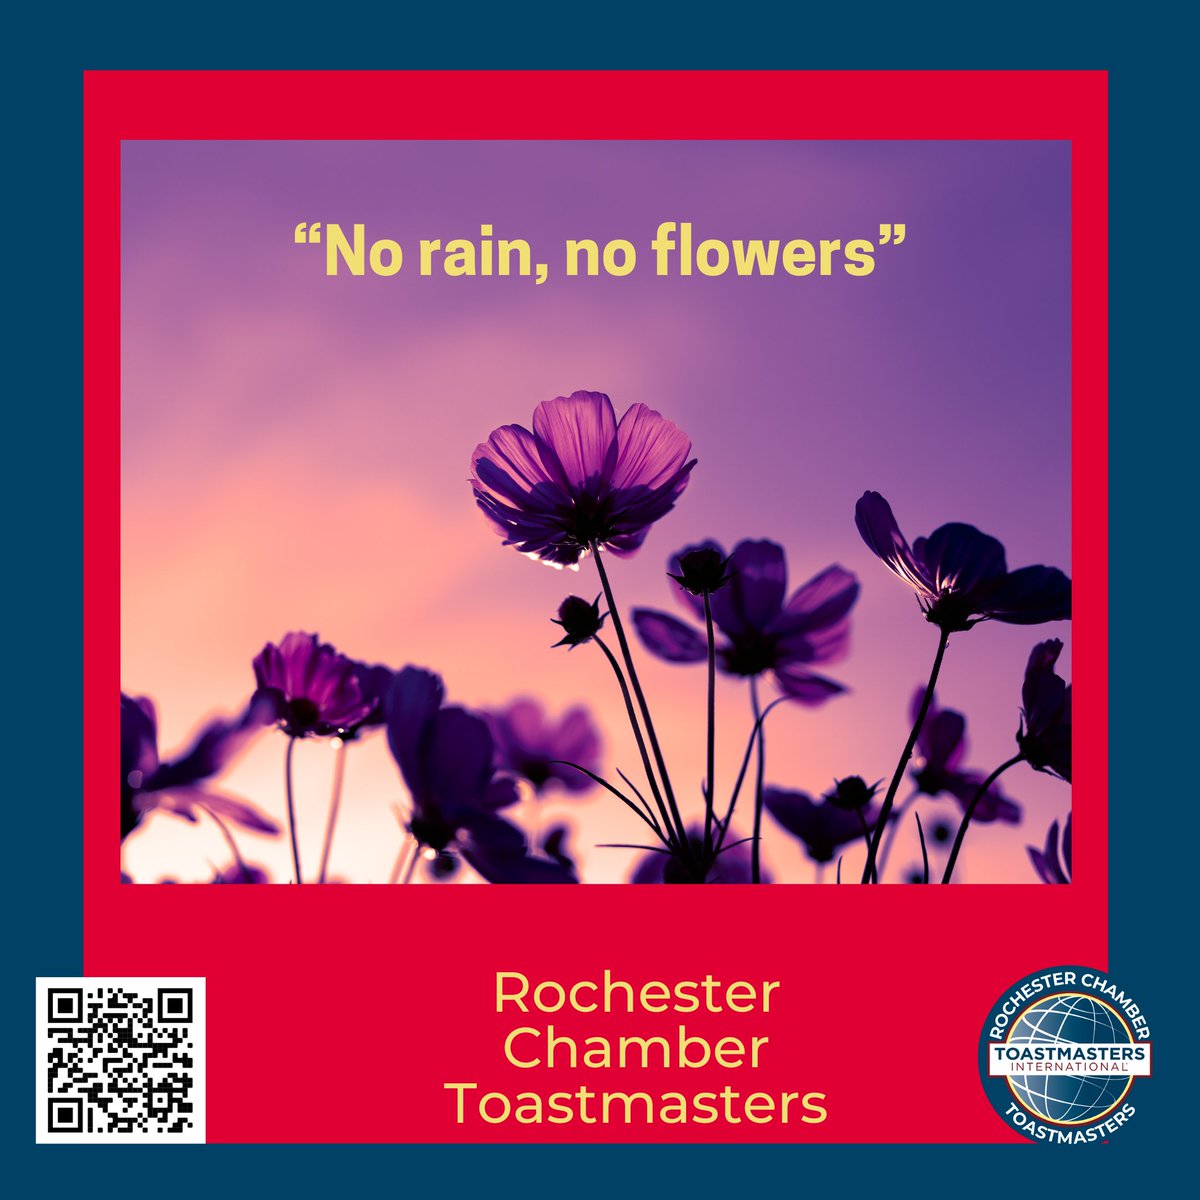 Monday Motivational - Use the power of showers to make for a sunny May #Toastmasters #rochestermn #rochmn #publicspeaking #neighborshare #neighborstory #mondaymotivation #neighbors #flowers #spring